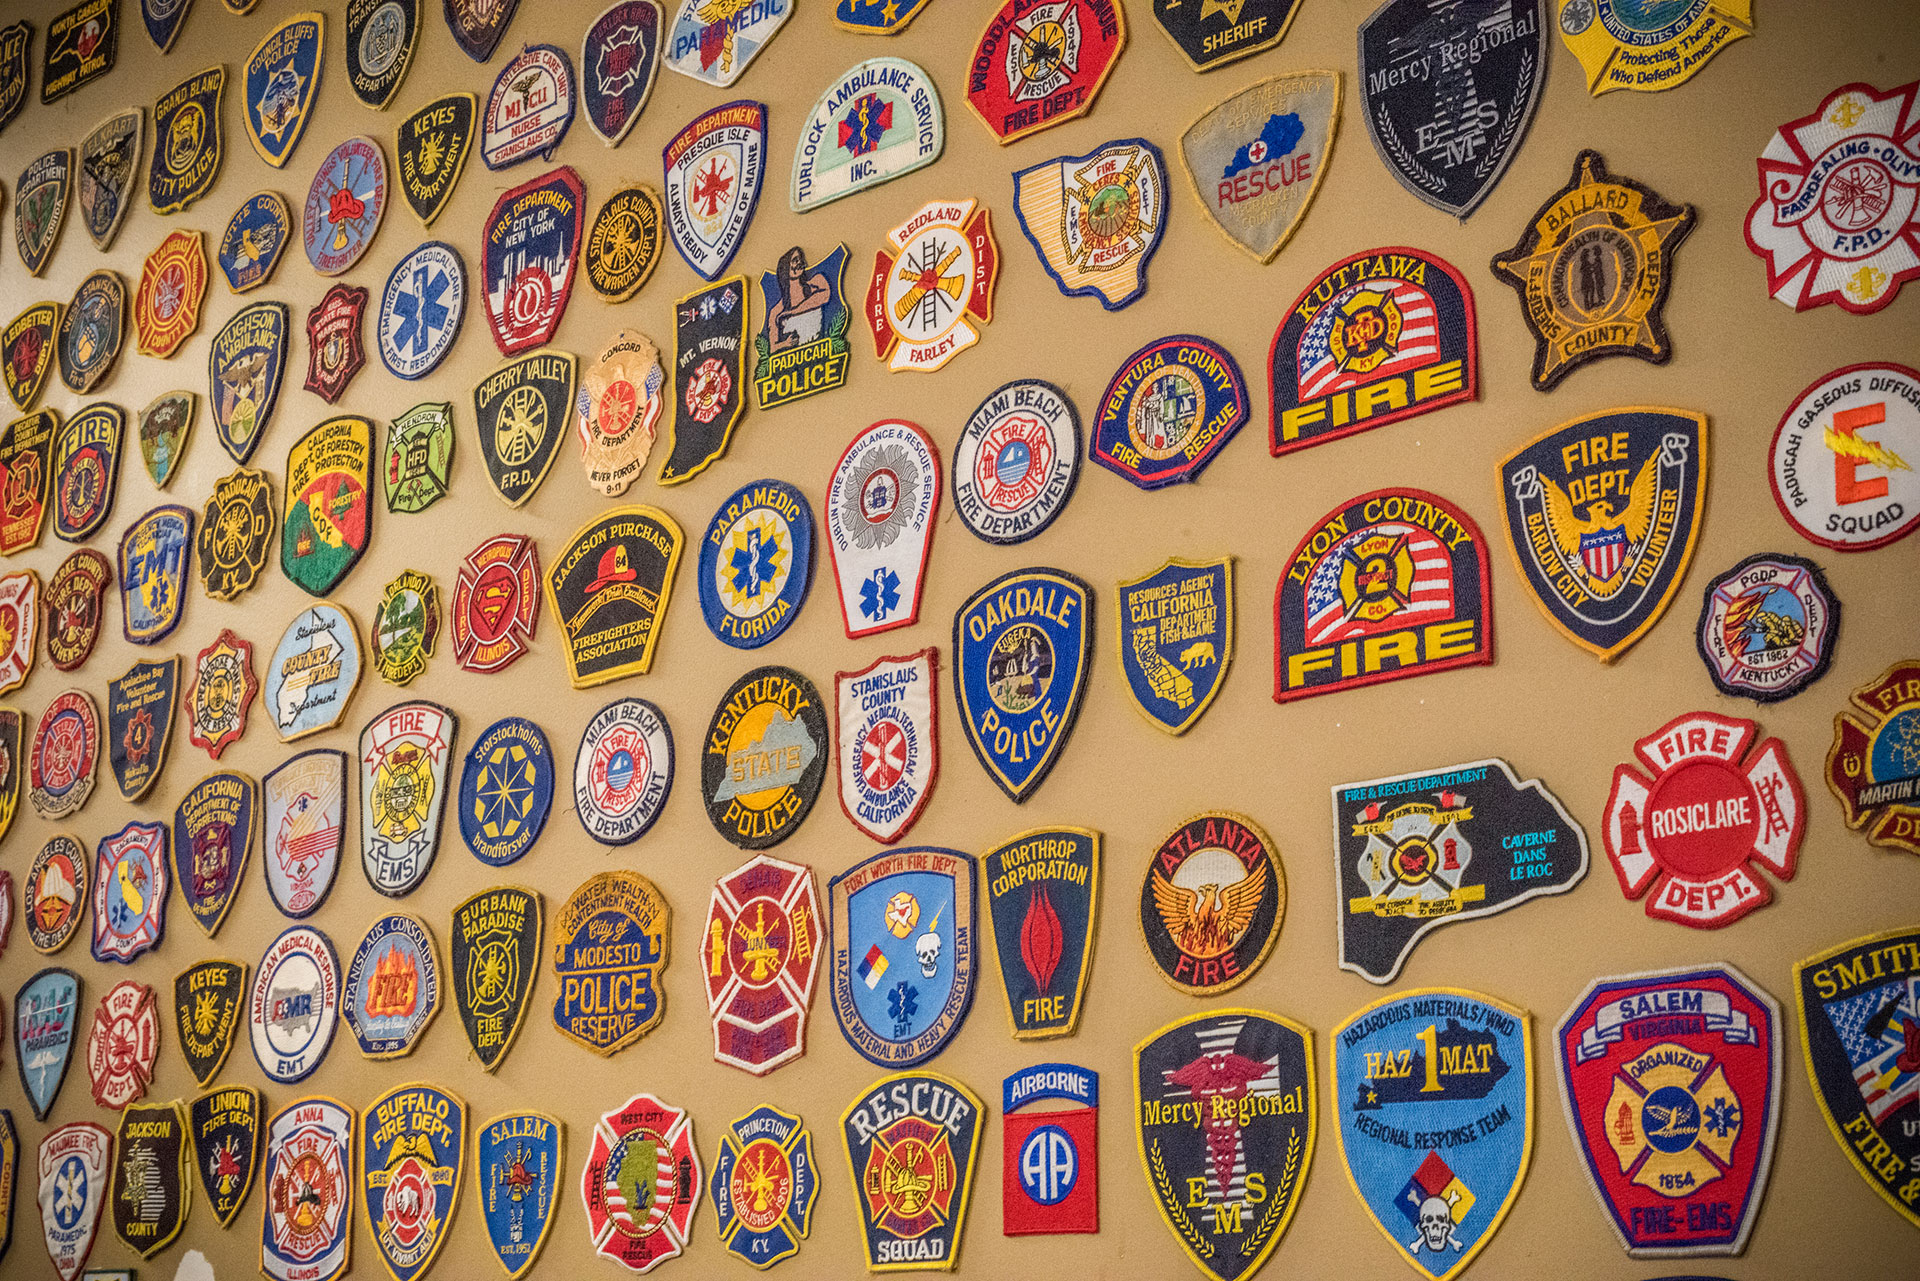 Wall of patches